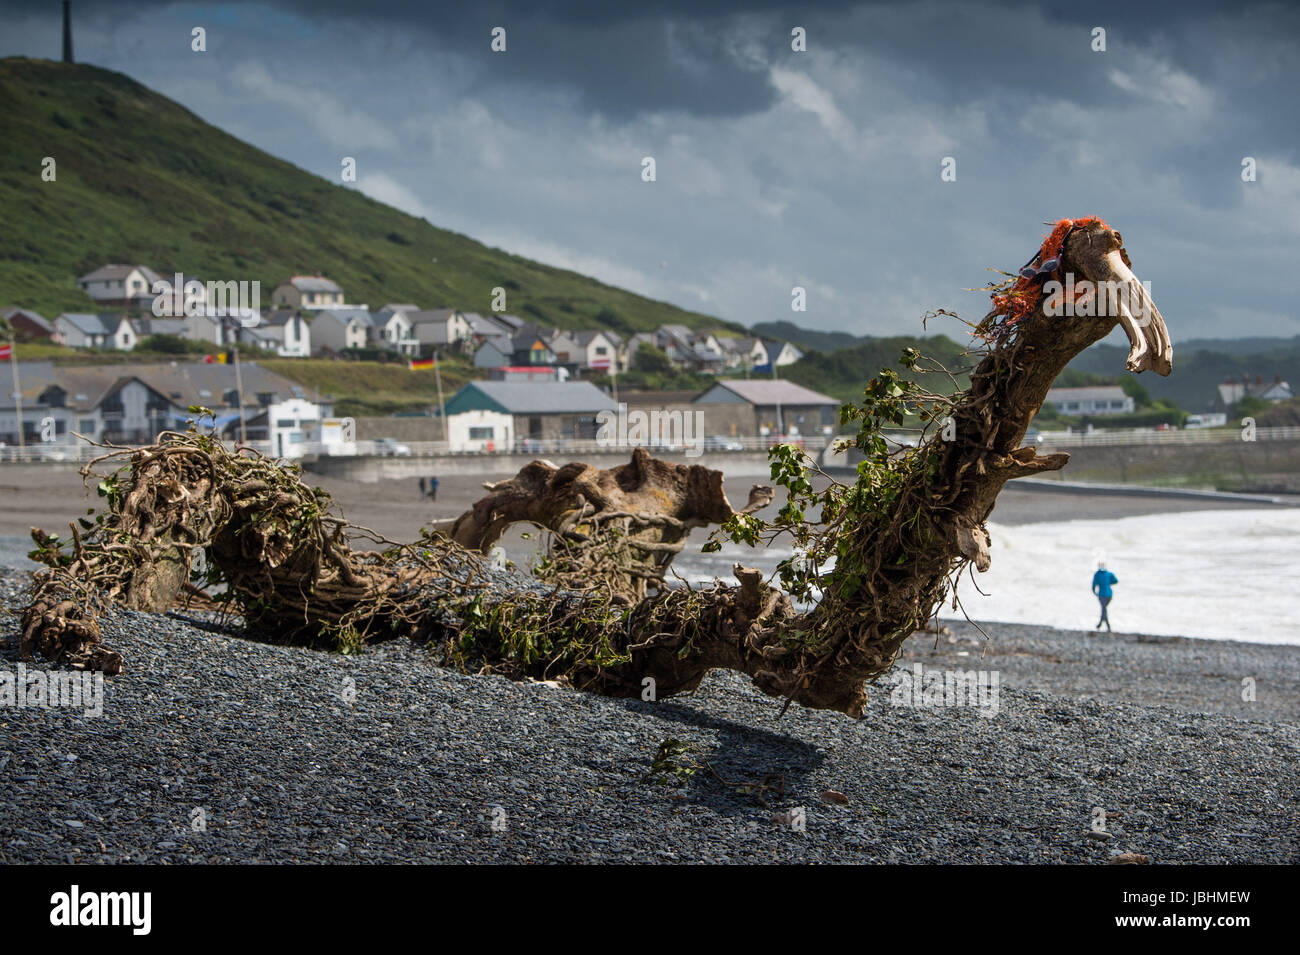 Aberystwyth Wales UK, Sunday 11 June 2017  UK Weather: An ivy covered tree, washed up on the beach and looking like a sea-serpent, on a blustery summer sunday afternoon in Aberystwyth  on the Cardigan Bay coast of west  Wales  Photo credit: Keith Morris / ALAMY Live News Stock Photo